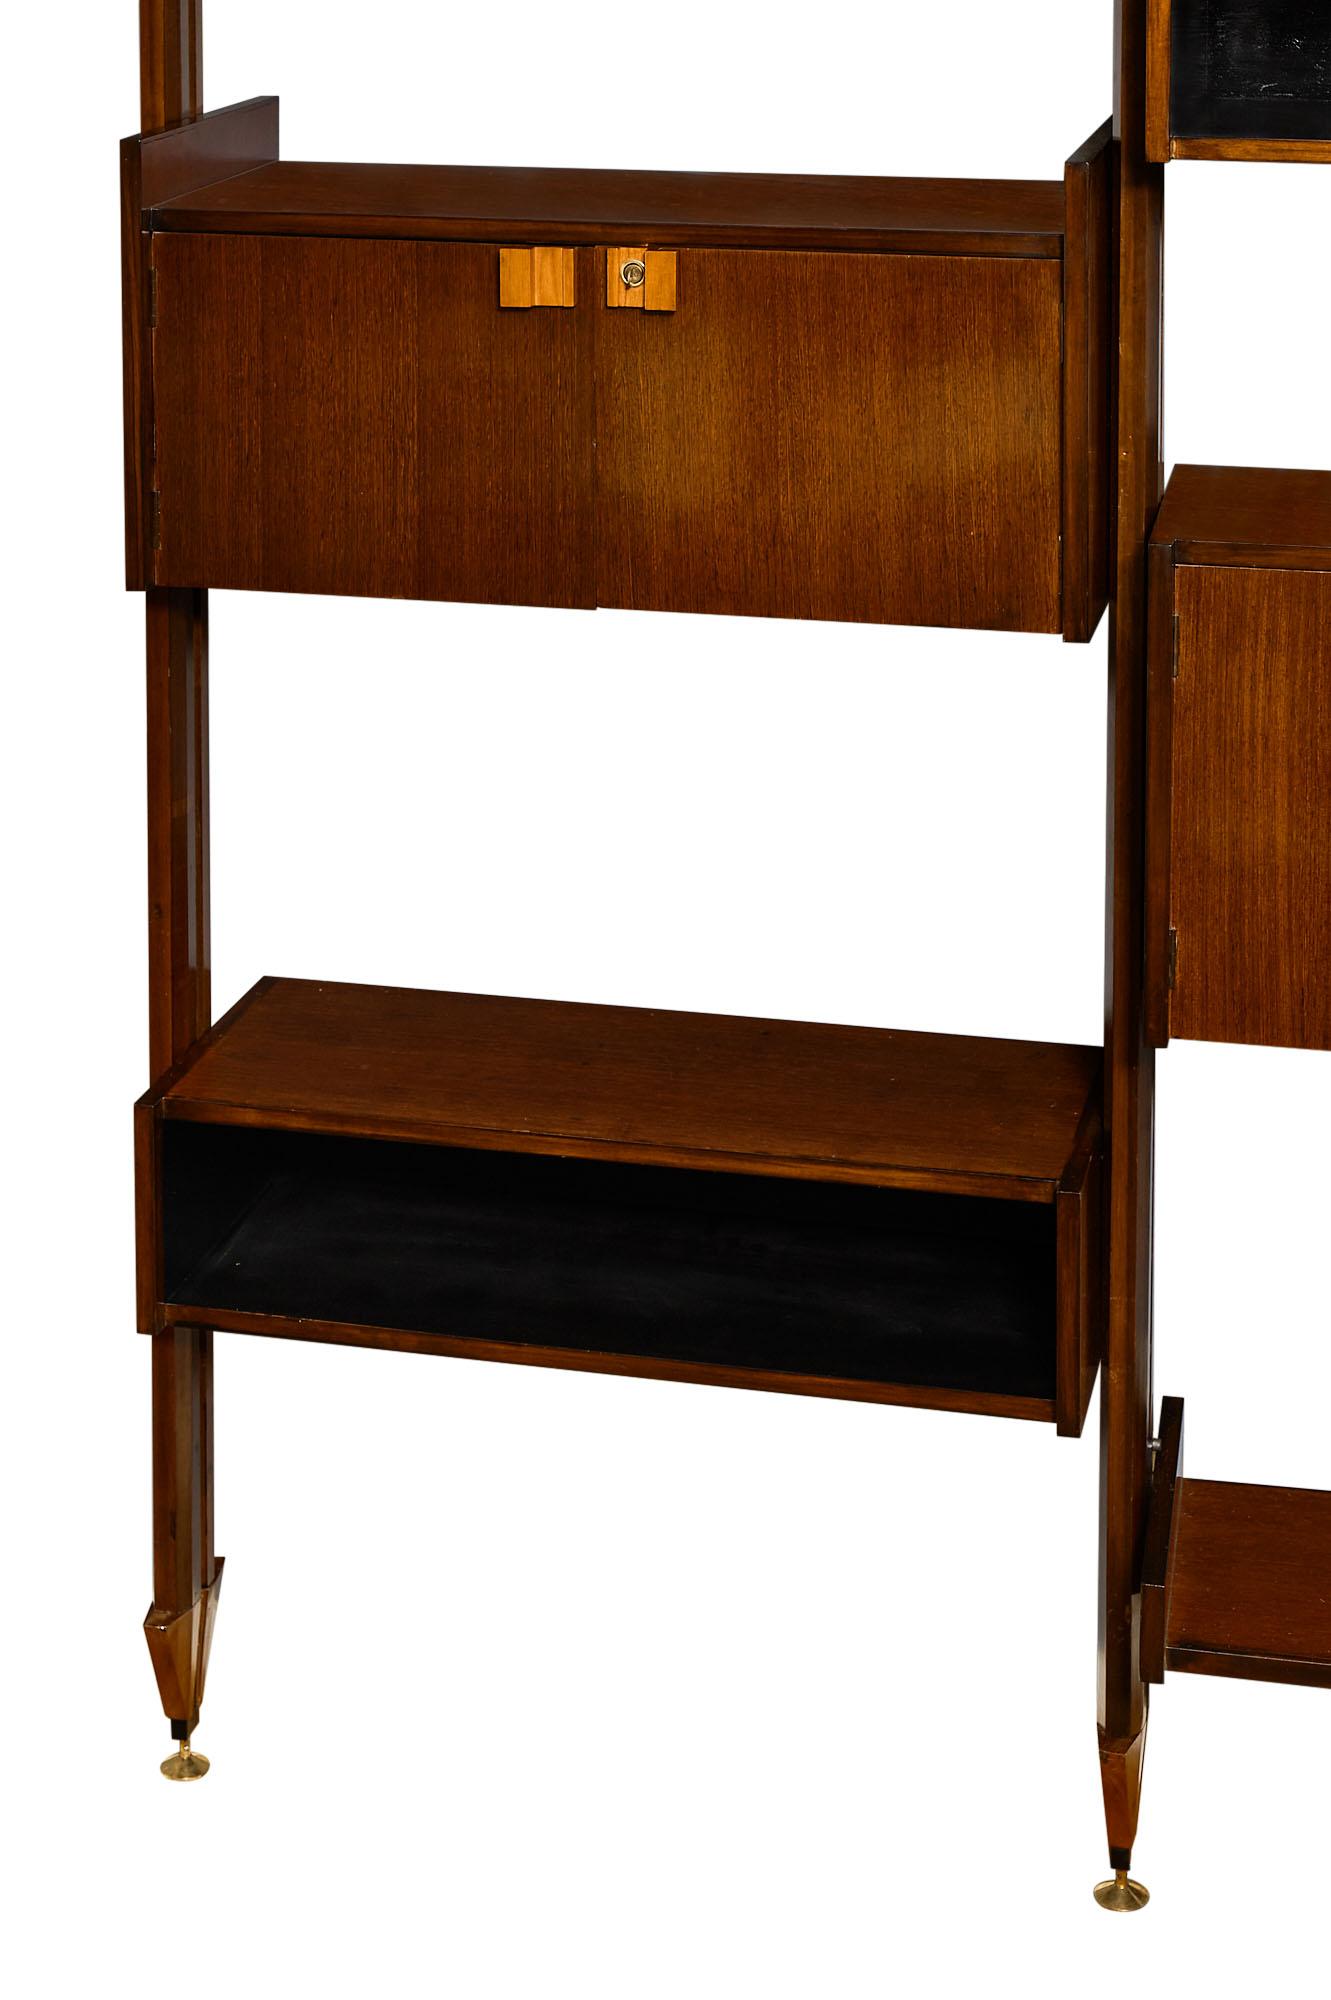 Vintage modular Italian bookcase from the 1950s. This important cabinet features various elements of Brazilian rosewood adorned with maple handles. The opened drawers; modular shelves; and cabinets with doors can be arranged as desired. This